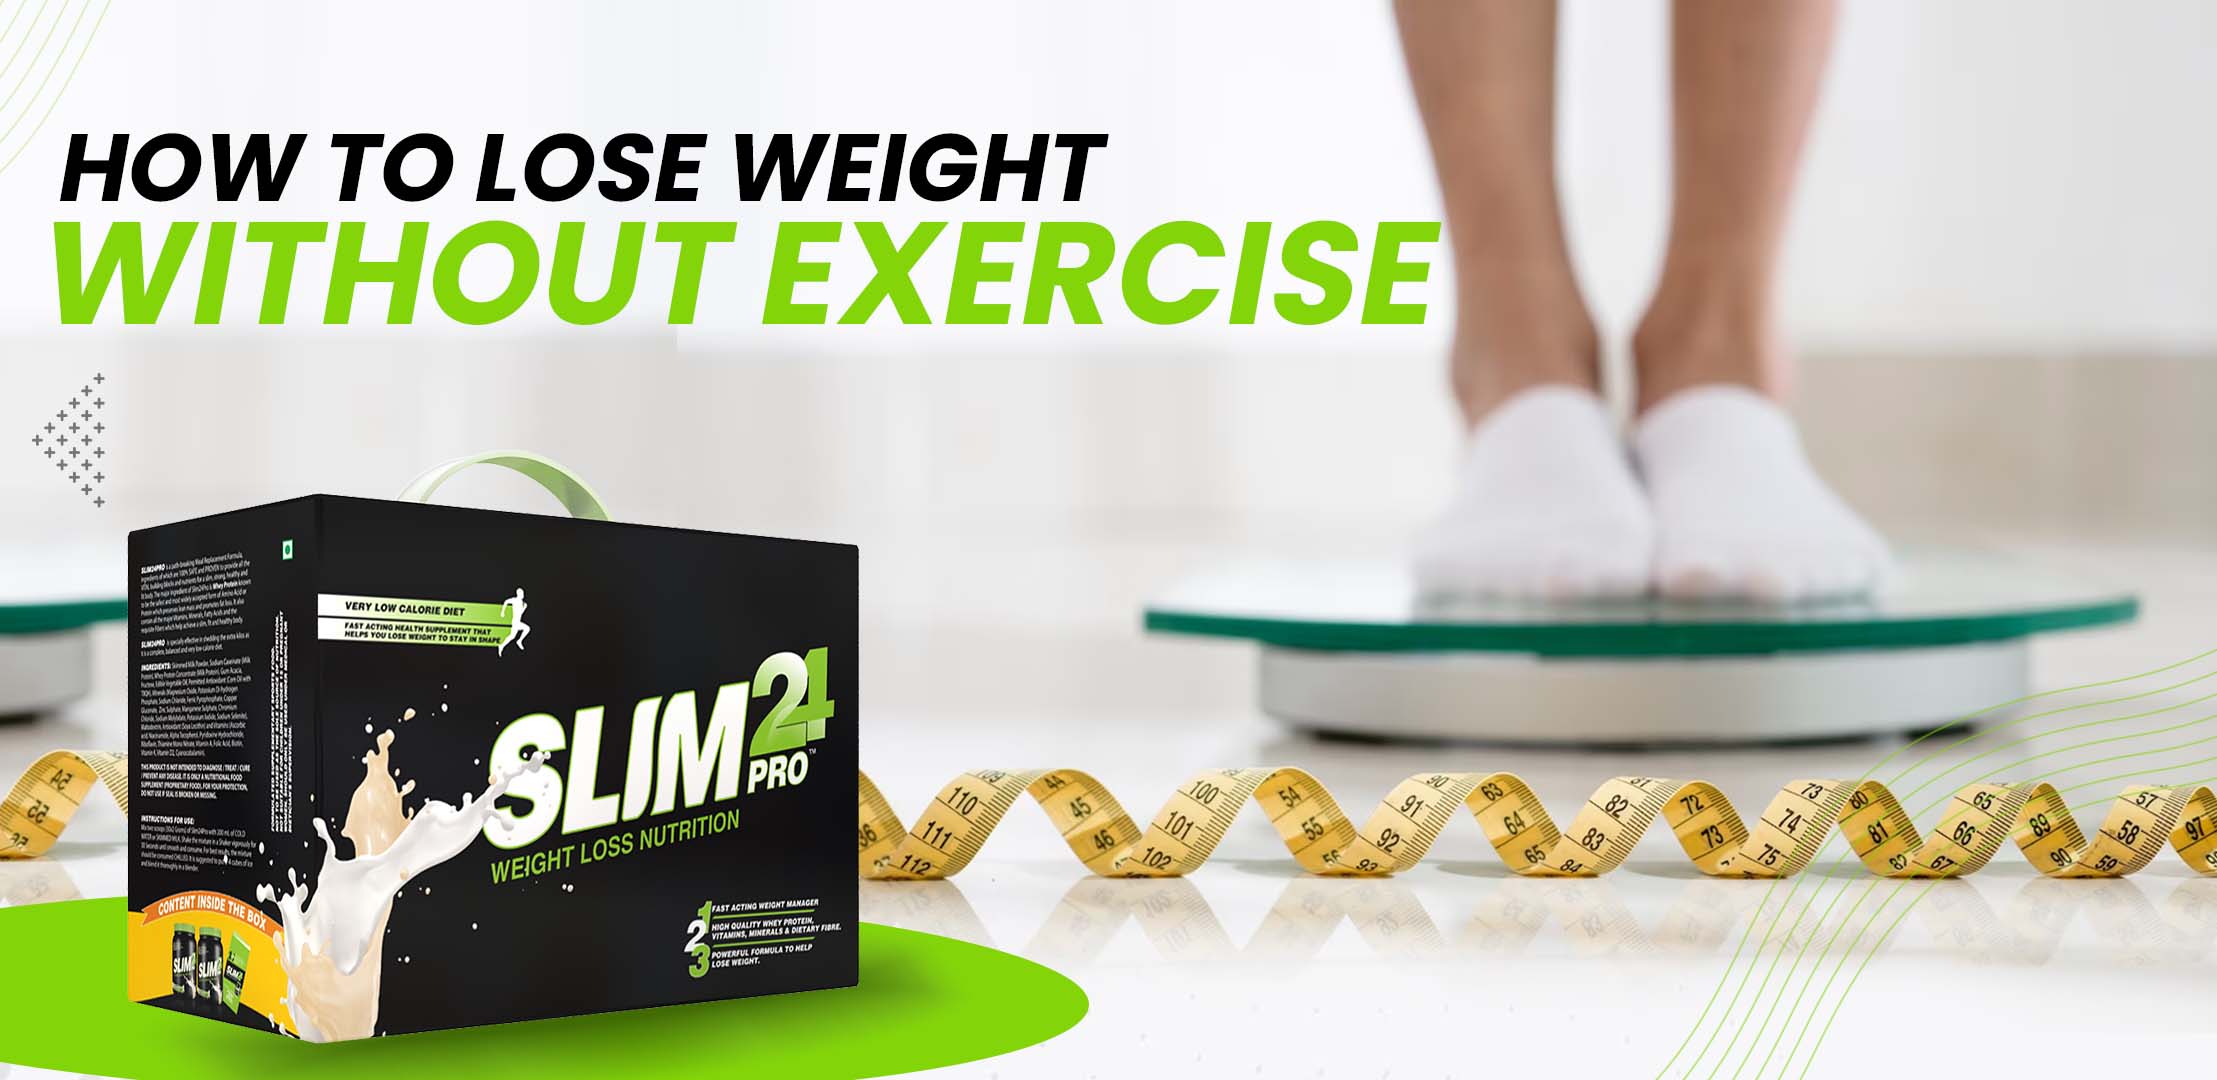 Lose Weight Without Exercising With Slim24 Pro